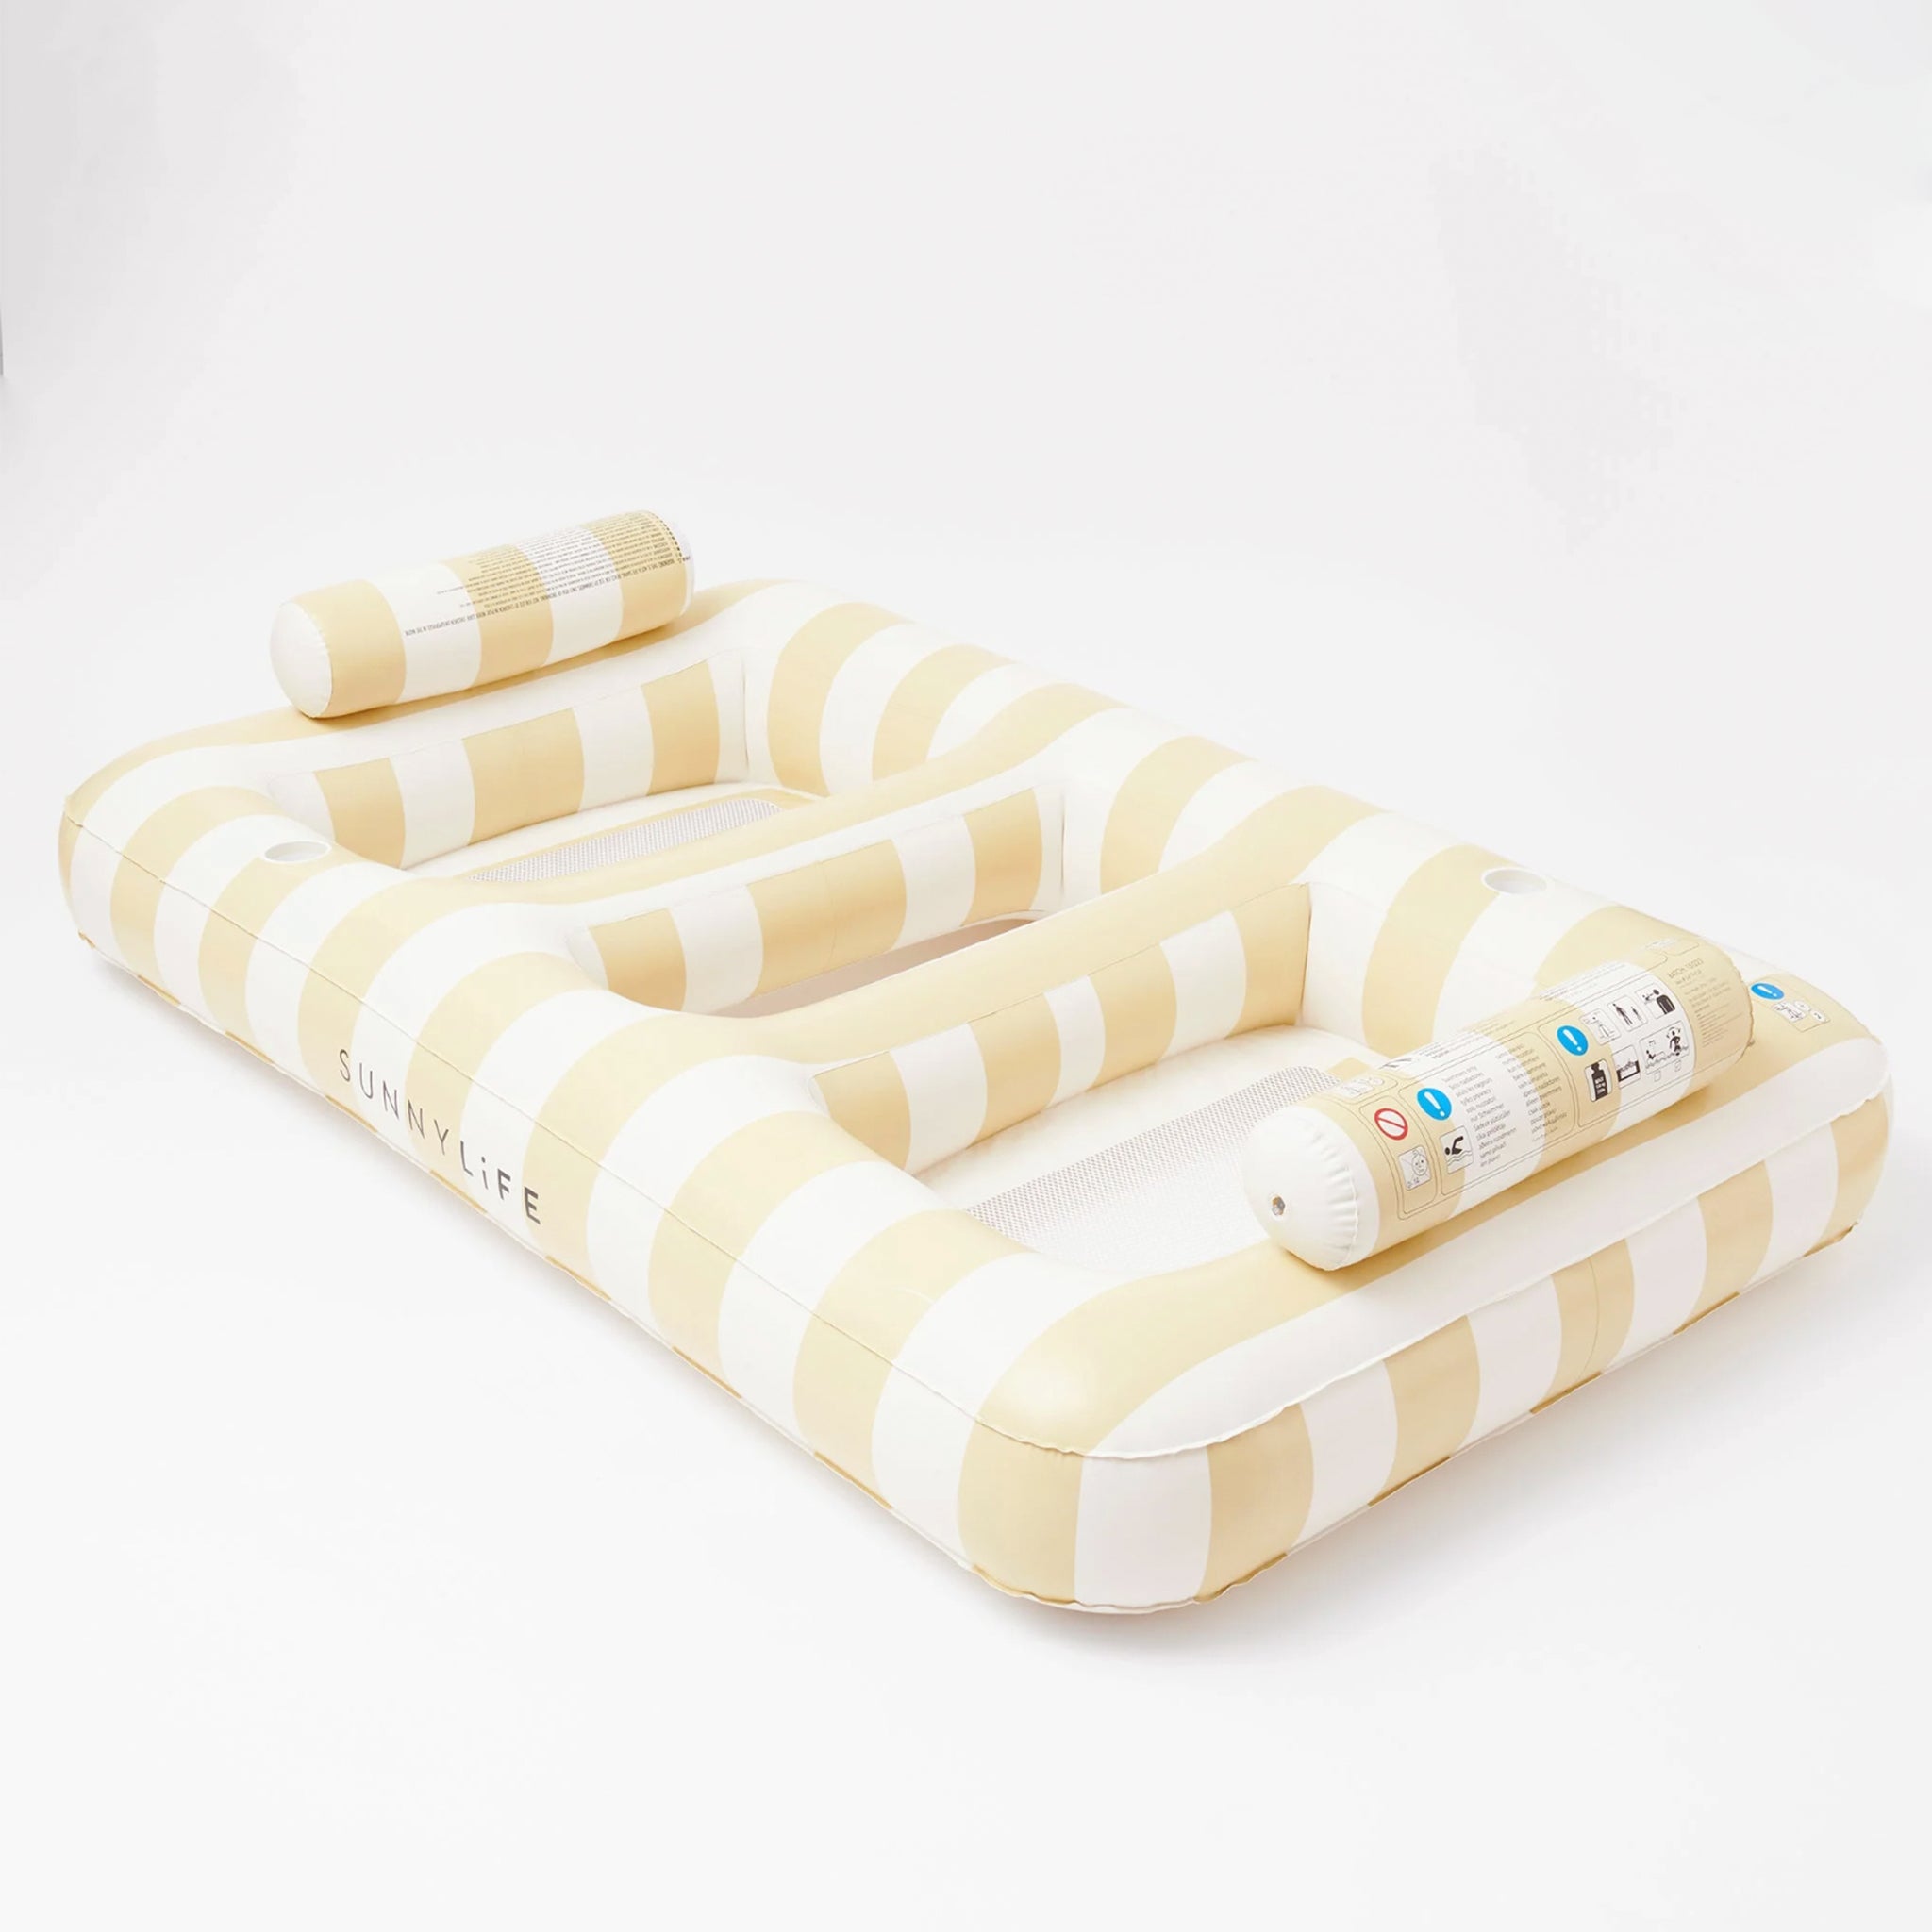 A two person ivory and light yellow striped pool float with a mesh loining and cup holders.